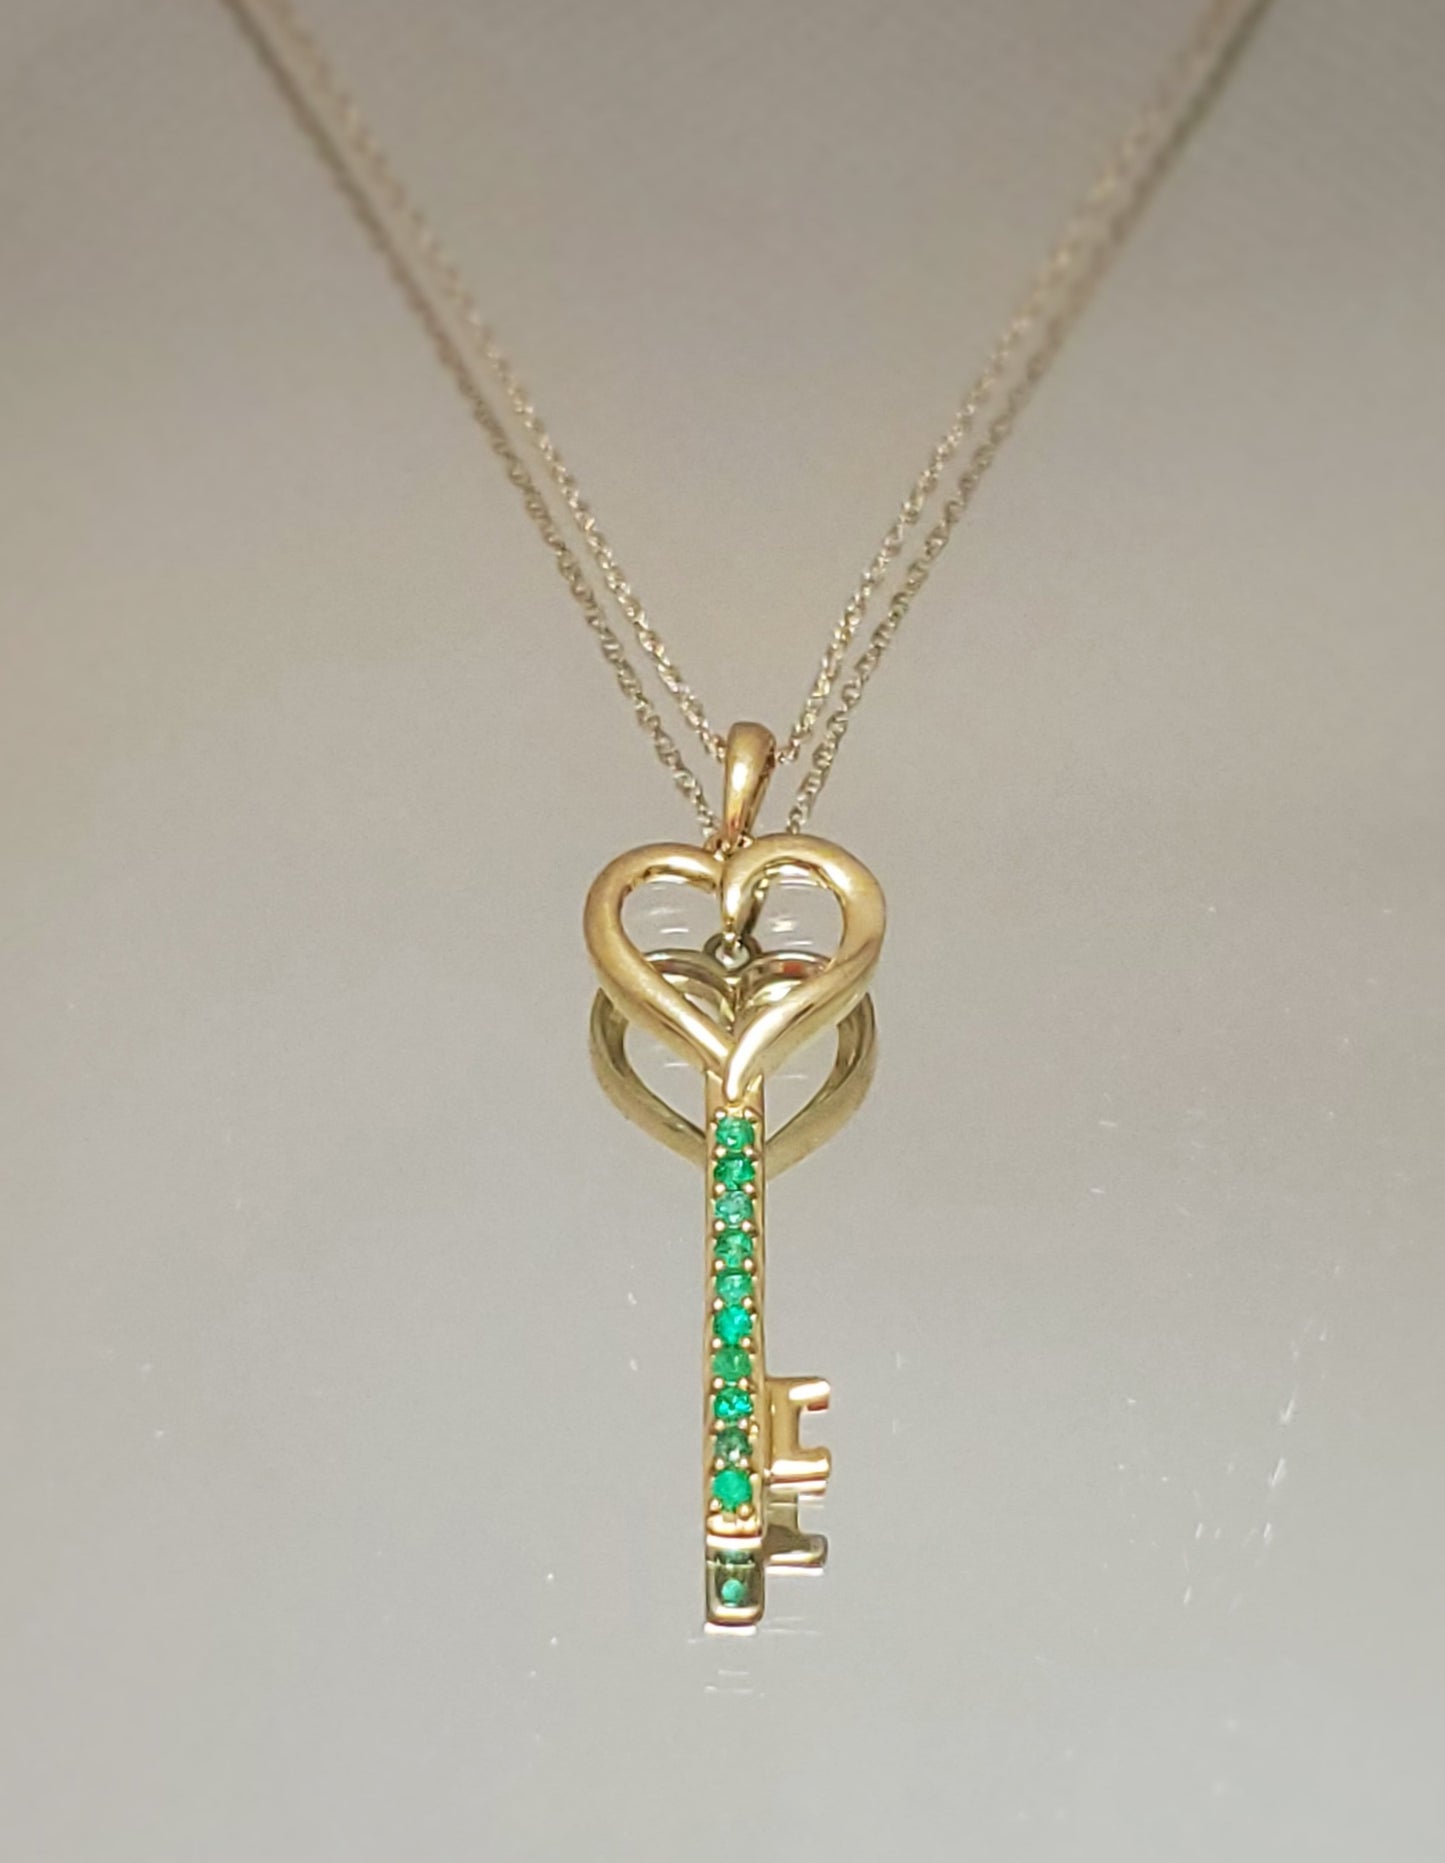 10K Yellow Gold Emerald Key Necklace